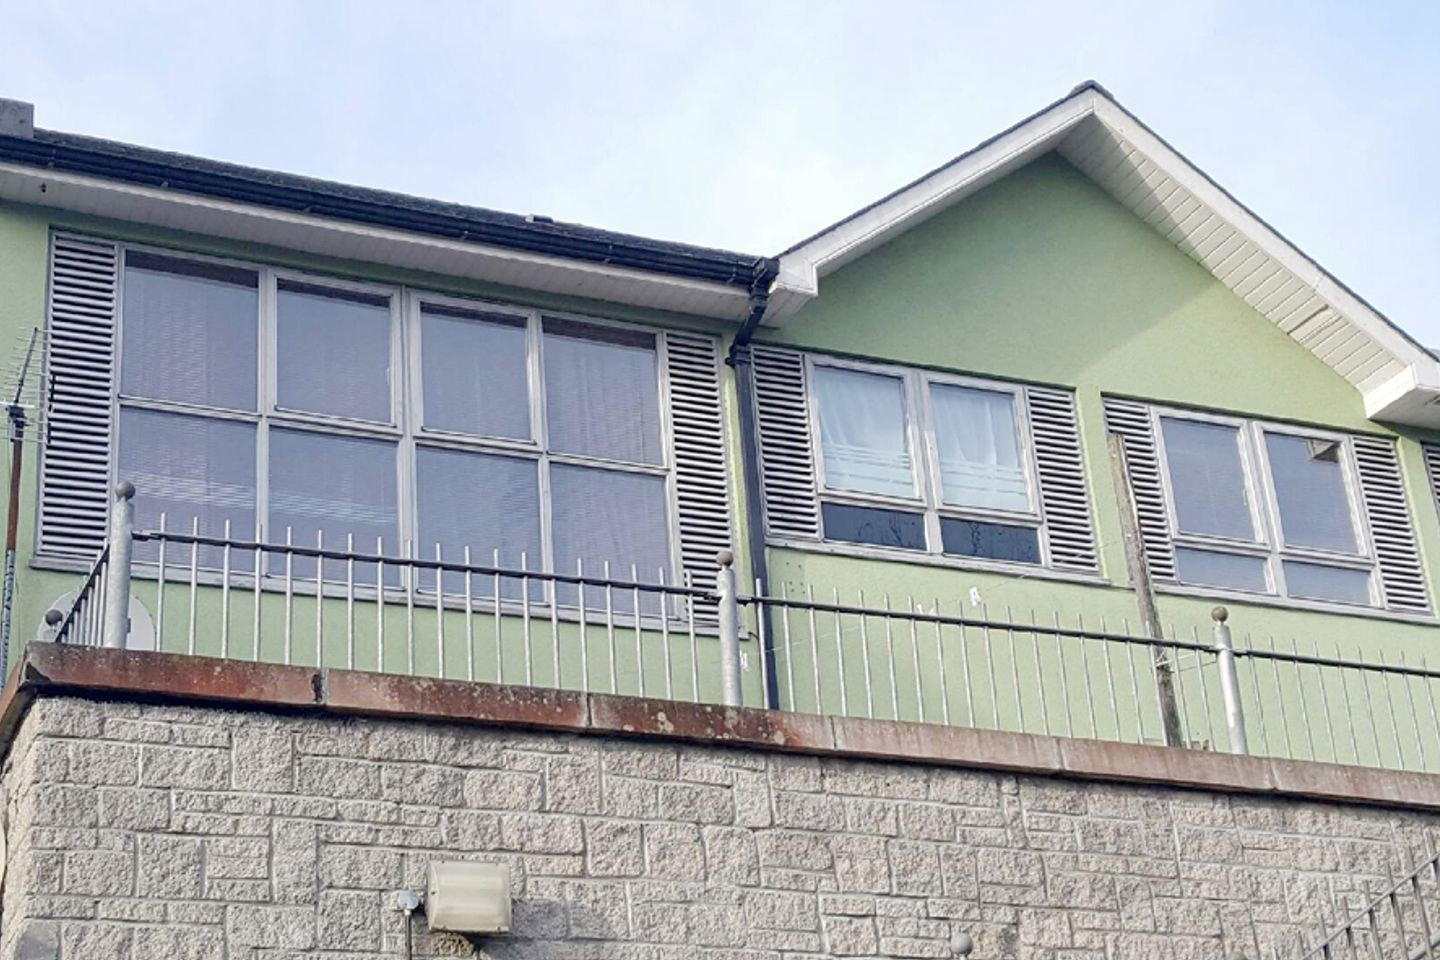 Apartment 11, Block 4, Tullamore, Co. Offaly, R35N278